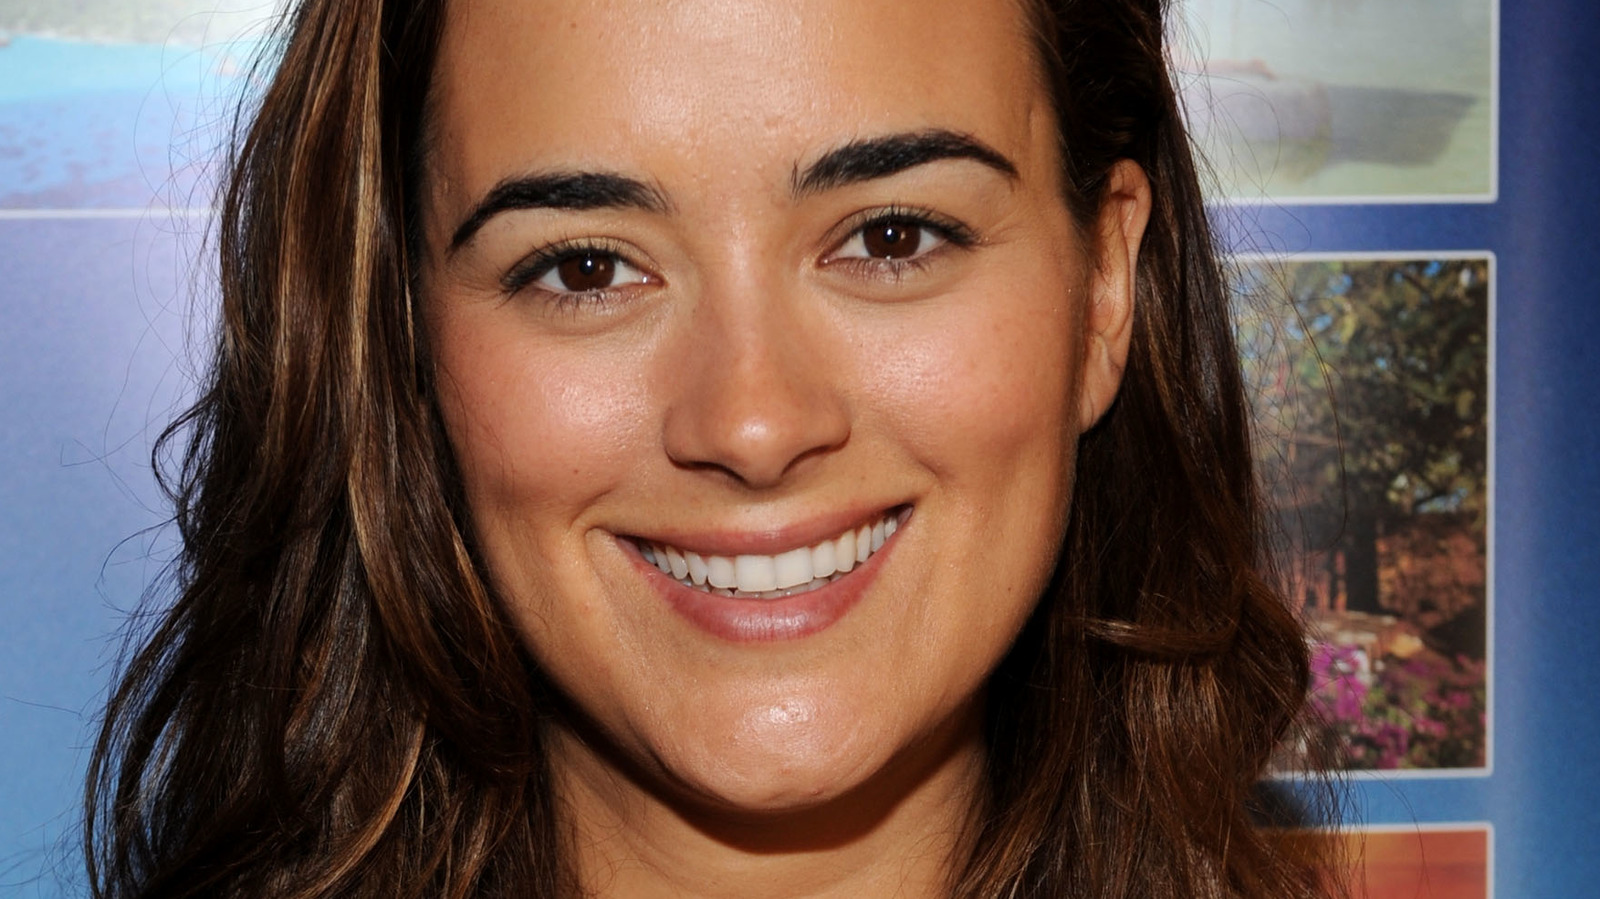 What is ziva from ncis doing now